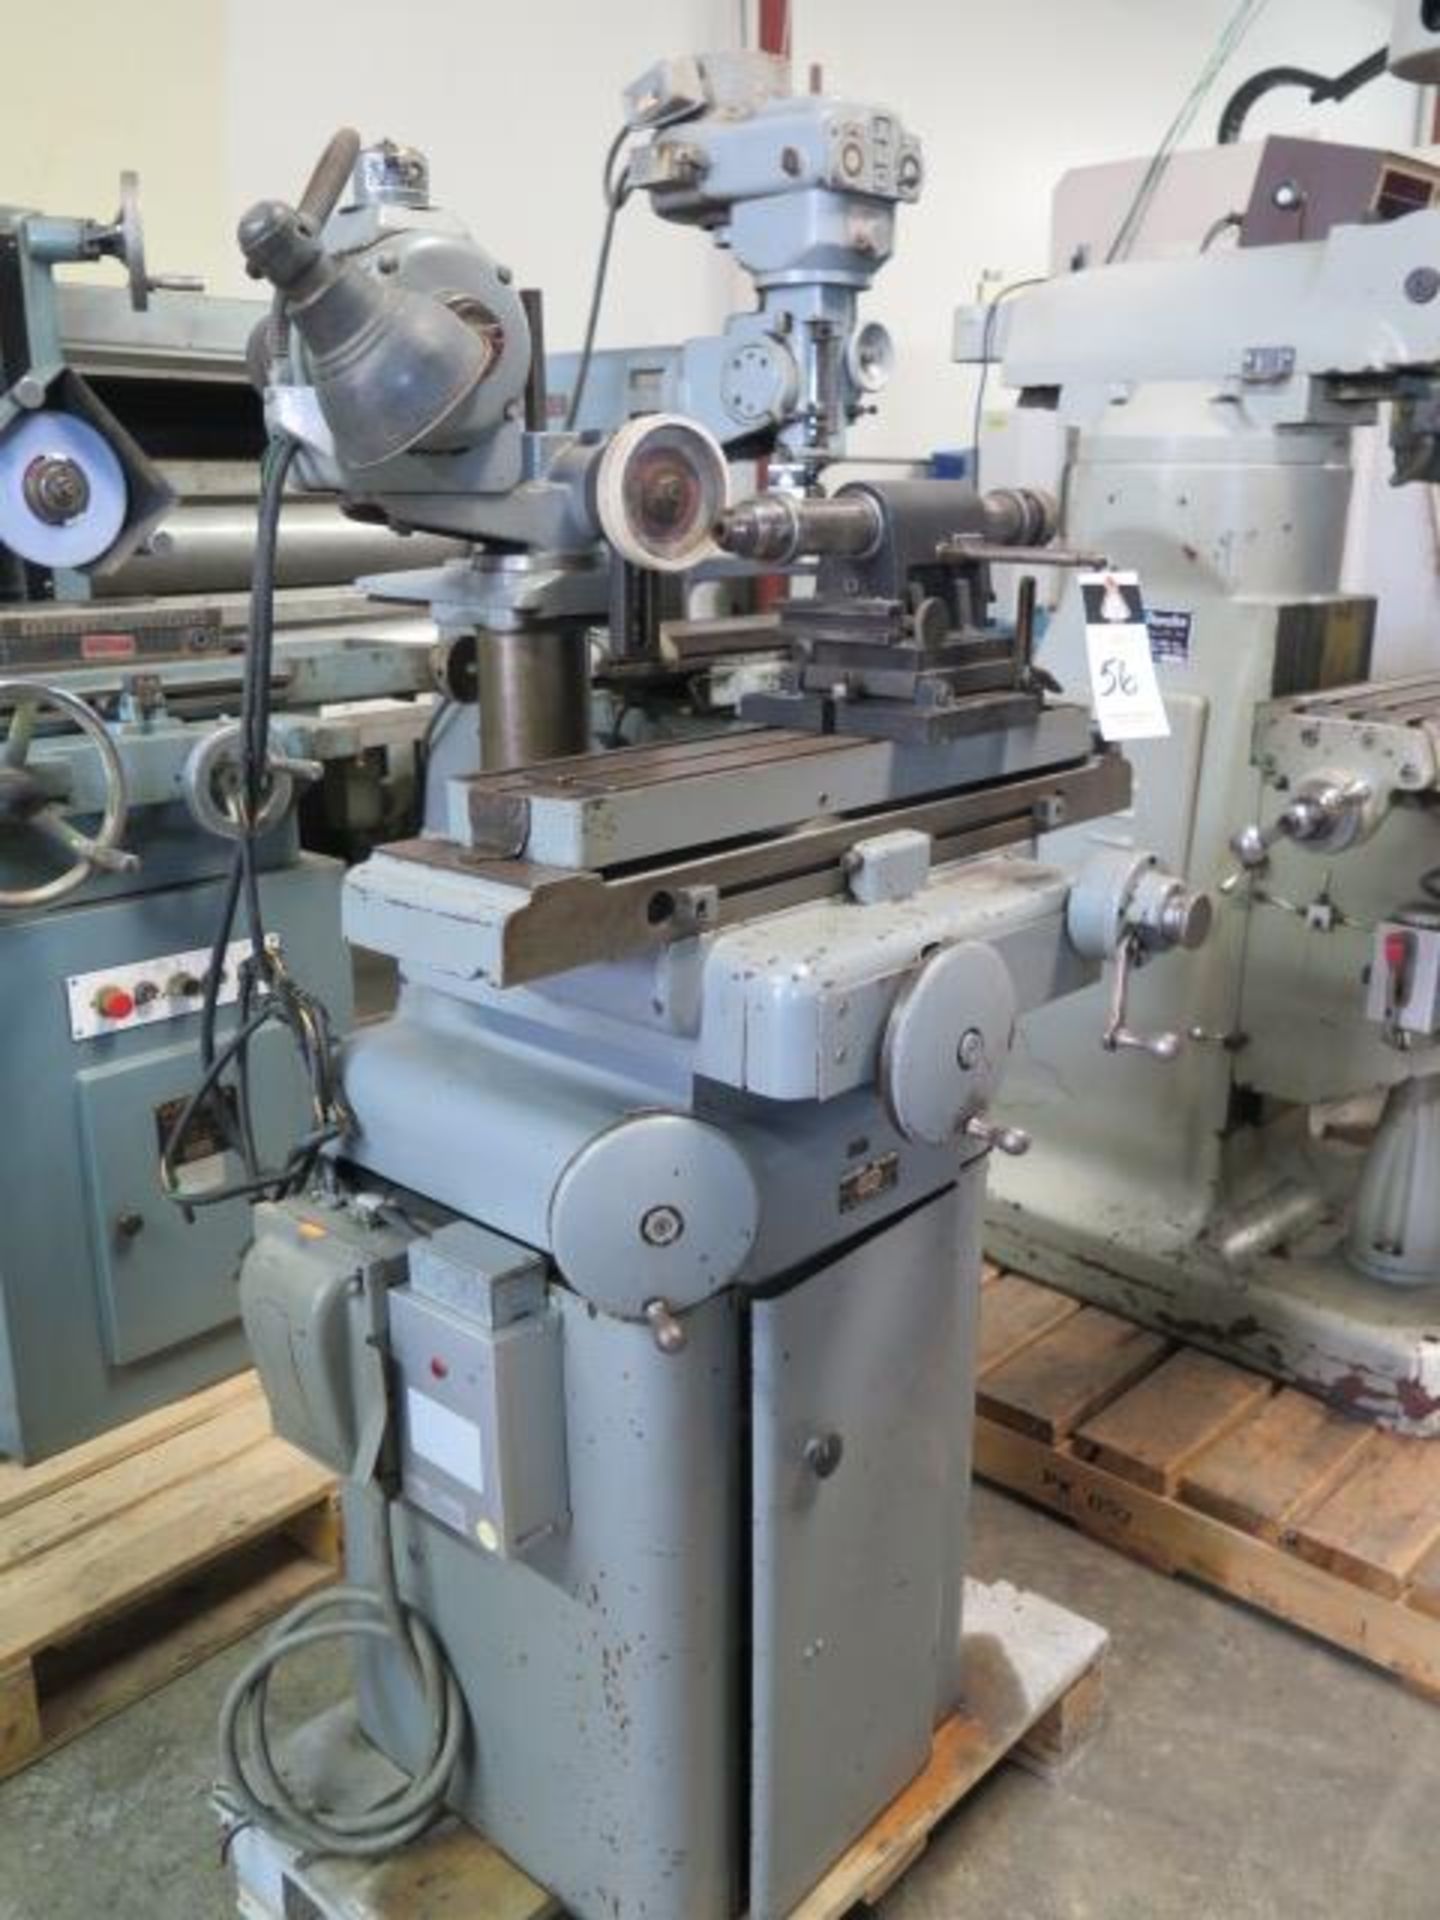 K.O.Lee BA860 Tool and Cutter Grinder s/n 5051 w/Weldon Air Fixture, 5” x 25” Table SOLD AS-IS - Image 2 of 6